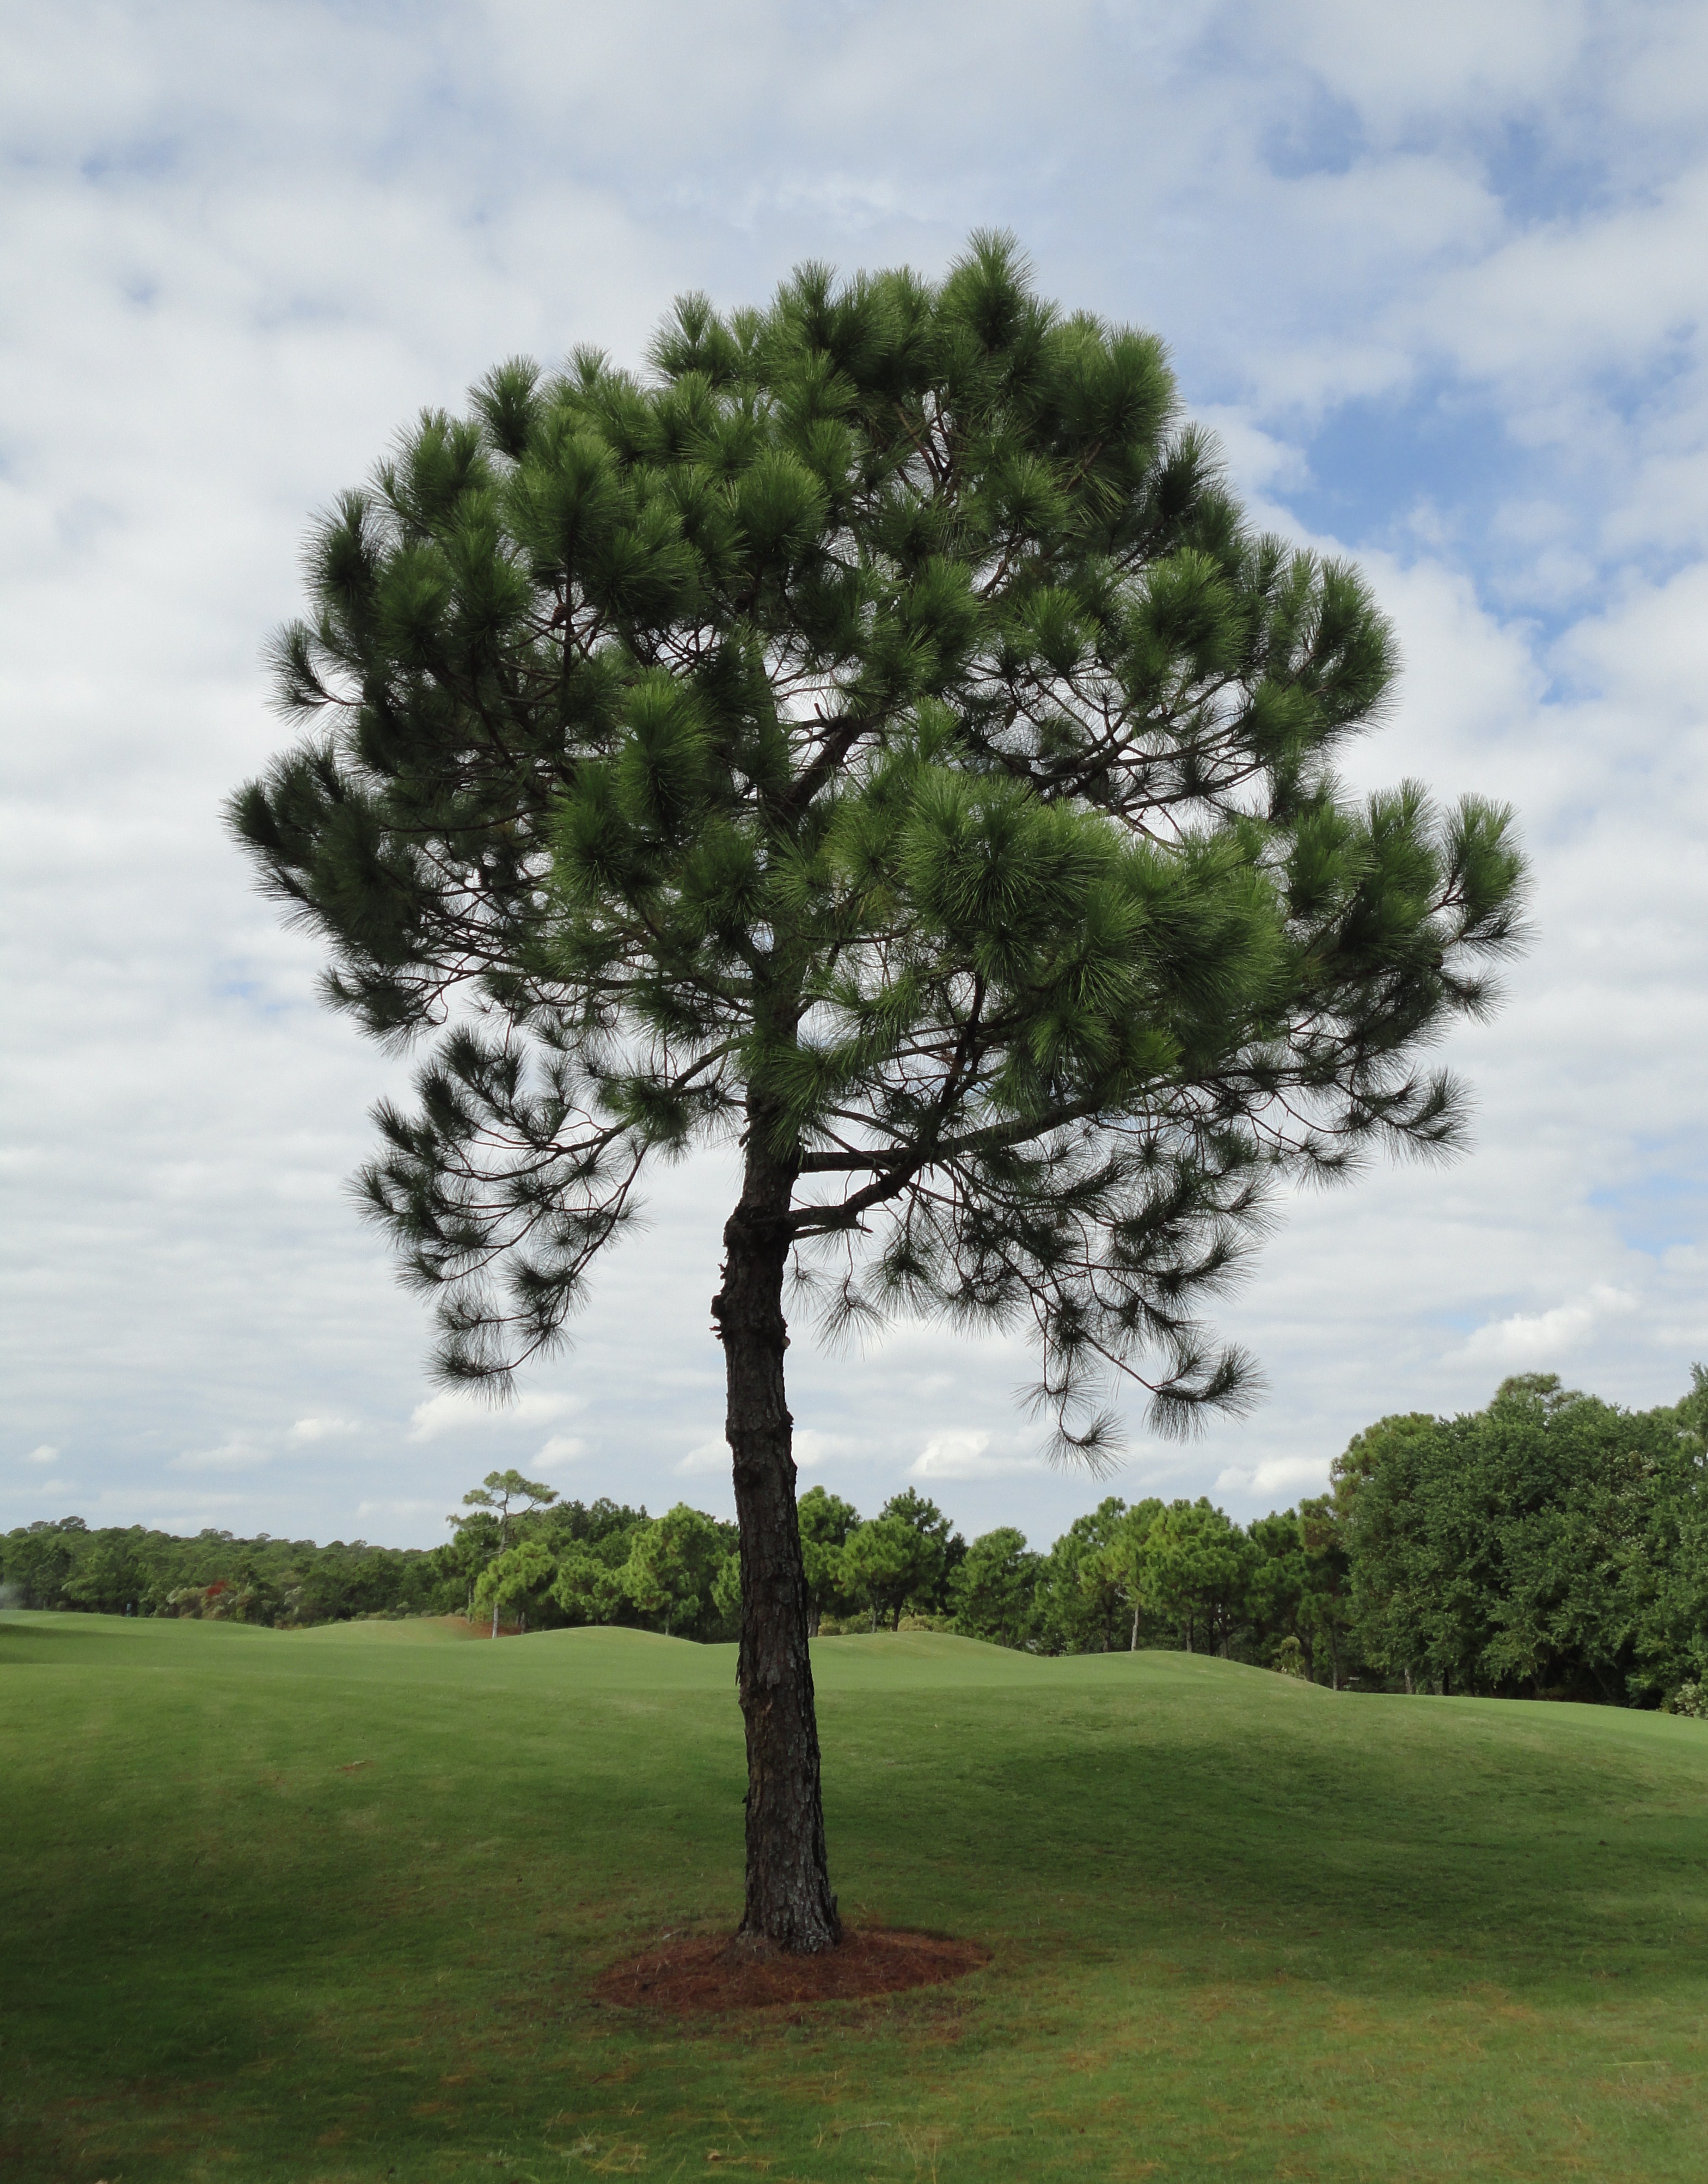 File:Tree at Golf Course.JPG - Wikimedia Commons